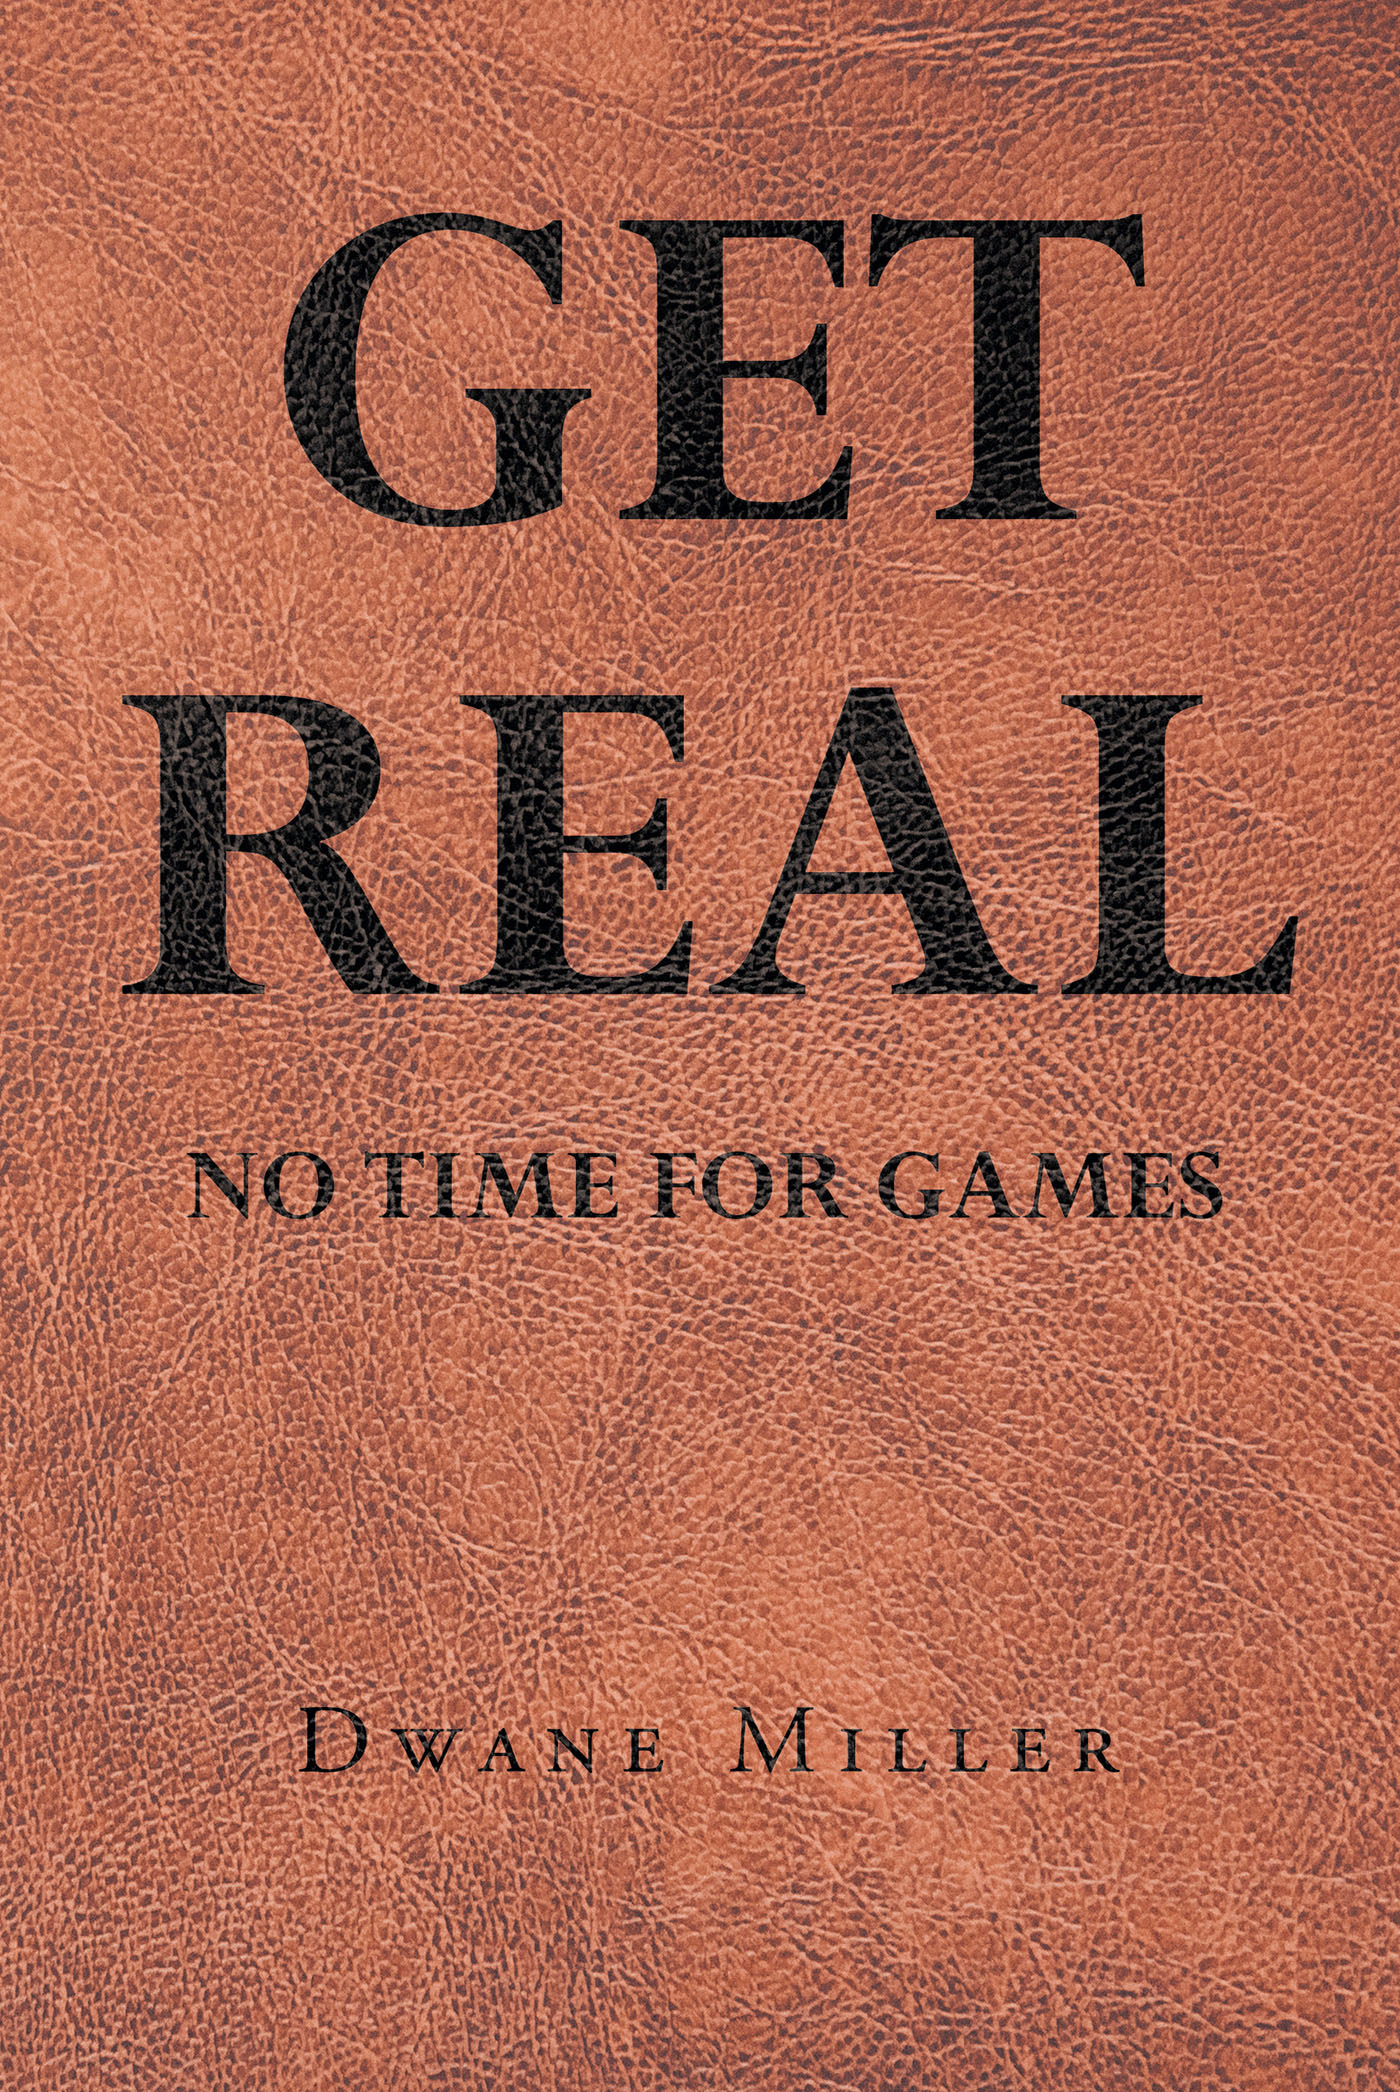 Dwane Miller’s Newly Released "Get Real: No Time for Games" is a Spiritual Call to Action That Pushes Readers to Seek God Wholeheartedly